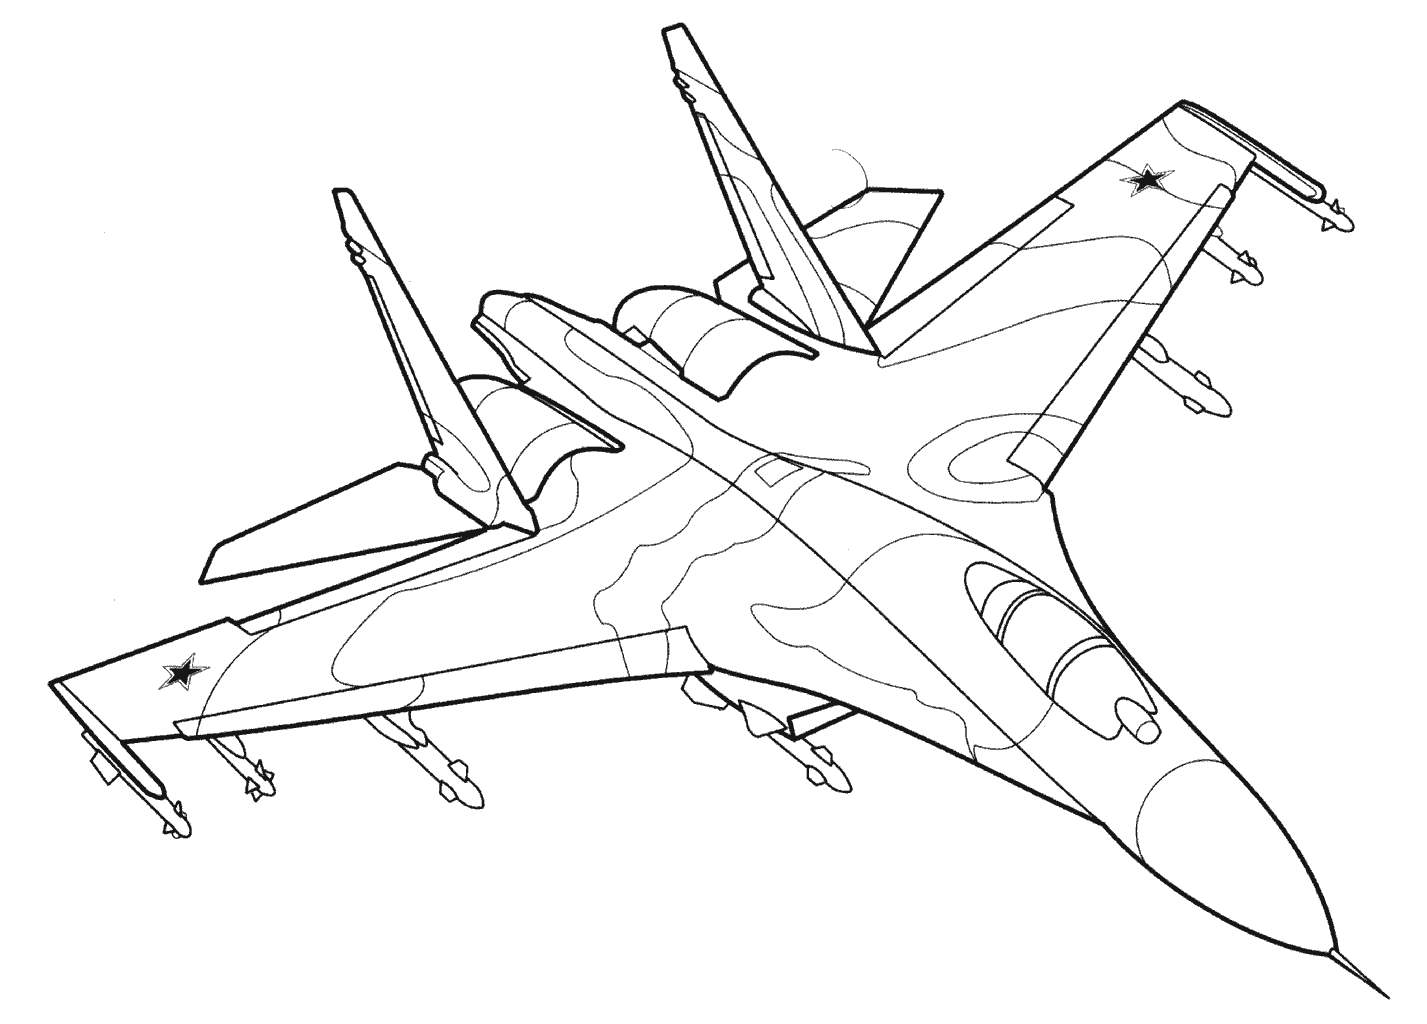 War Plane coloring pages to download and print for free